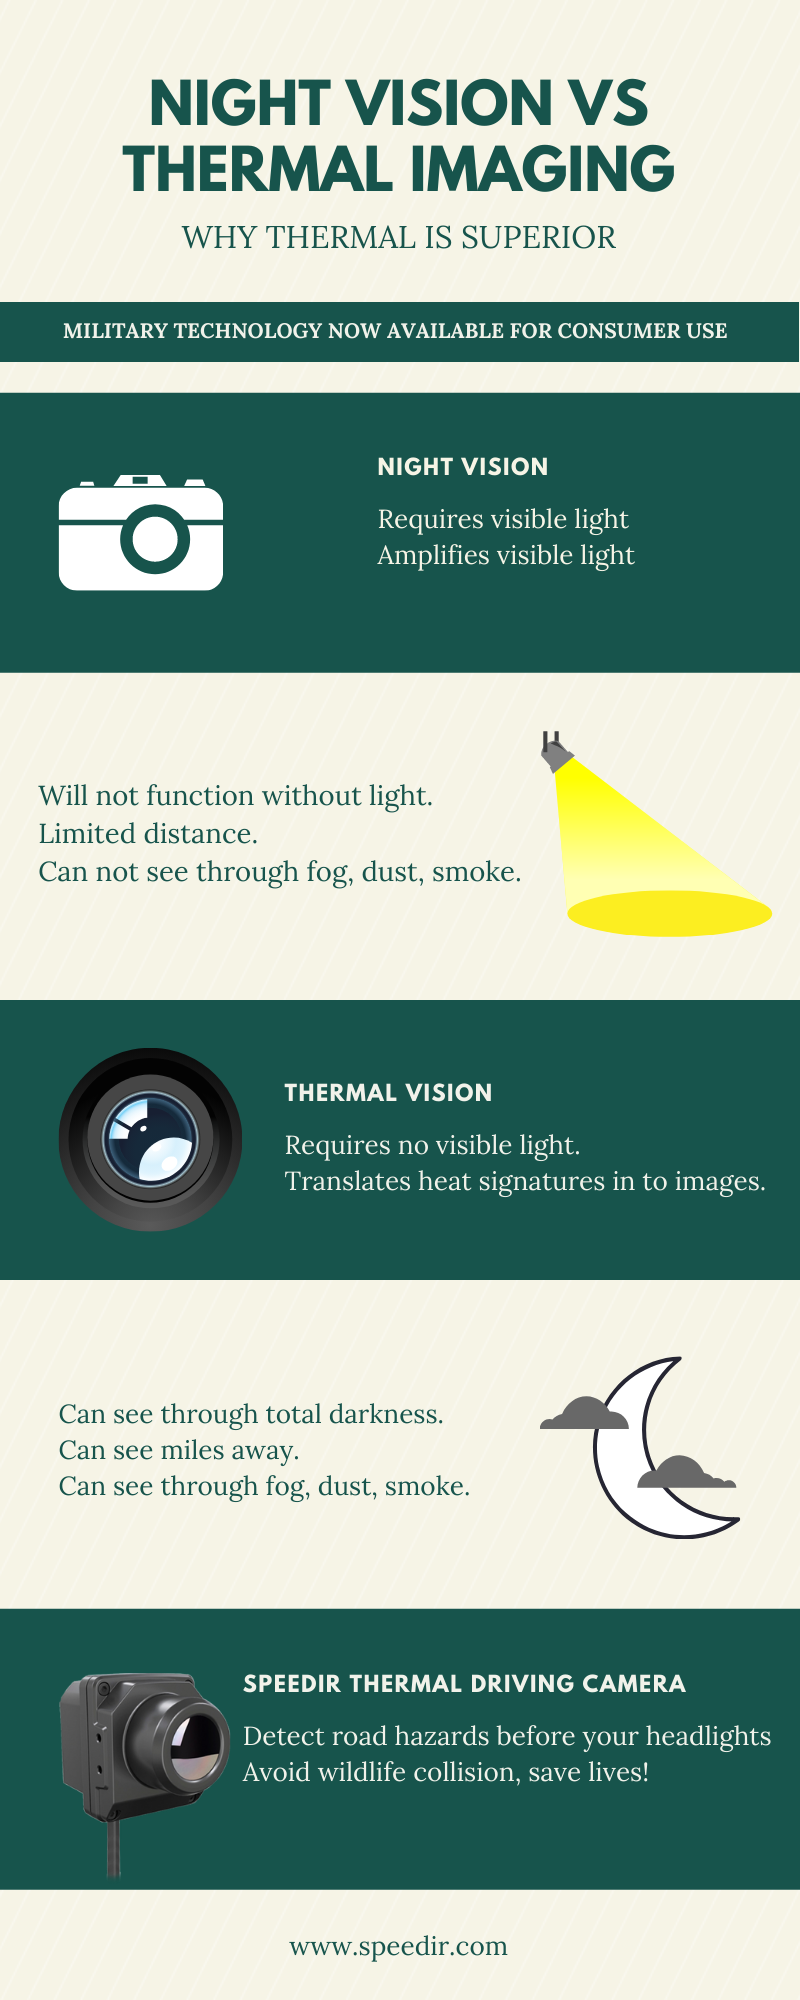 night vision vs thermal imaging explained infographic